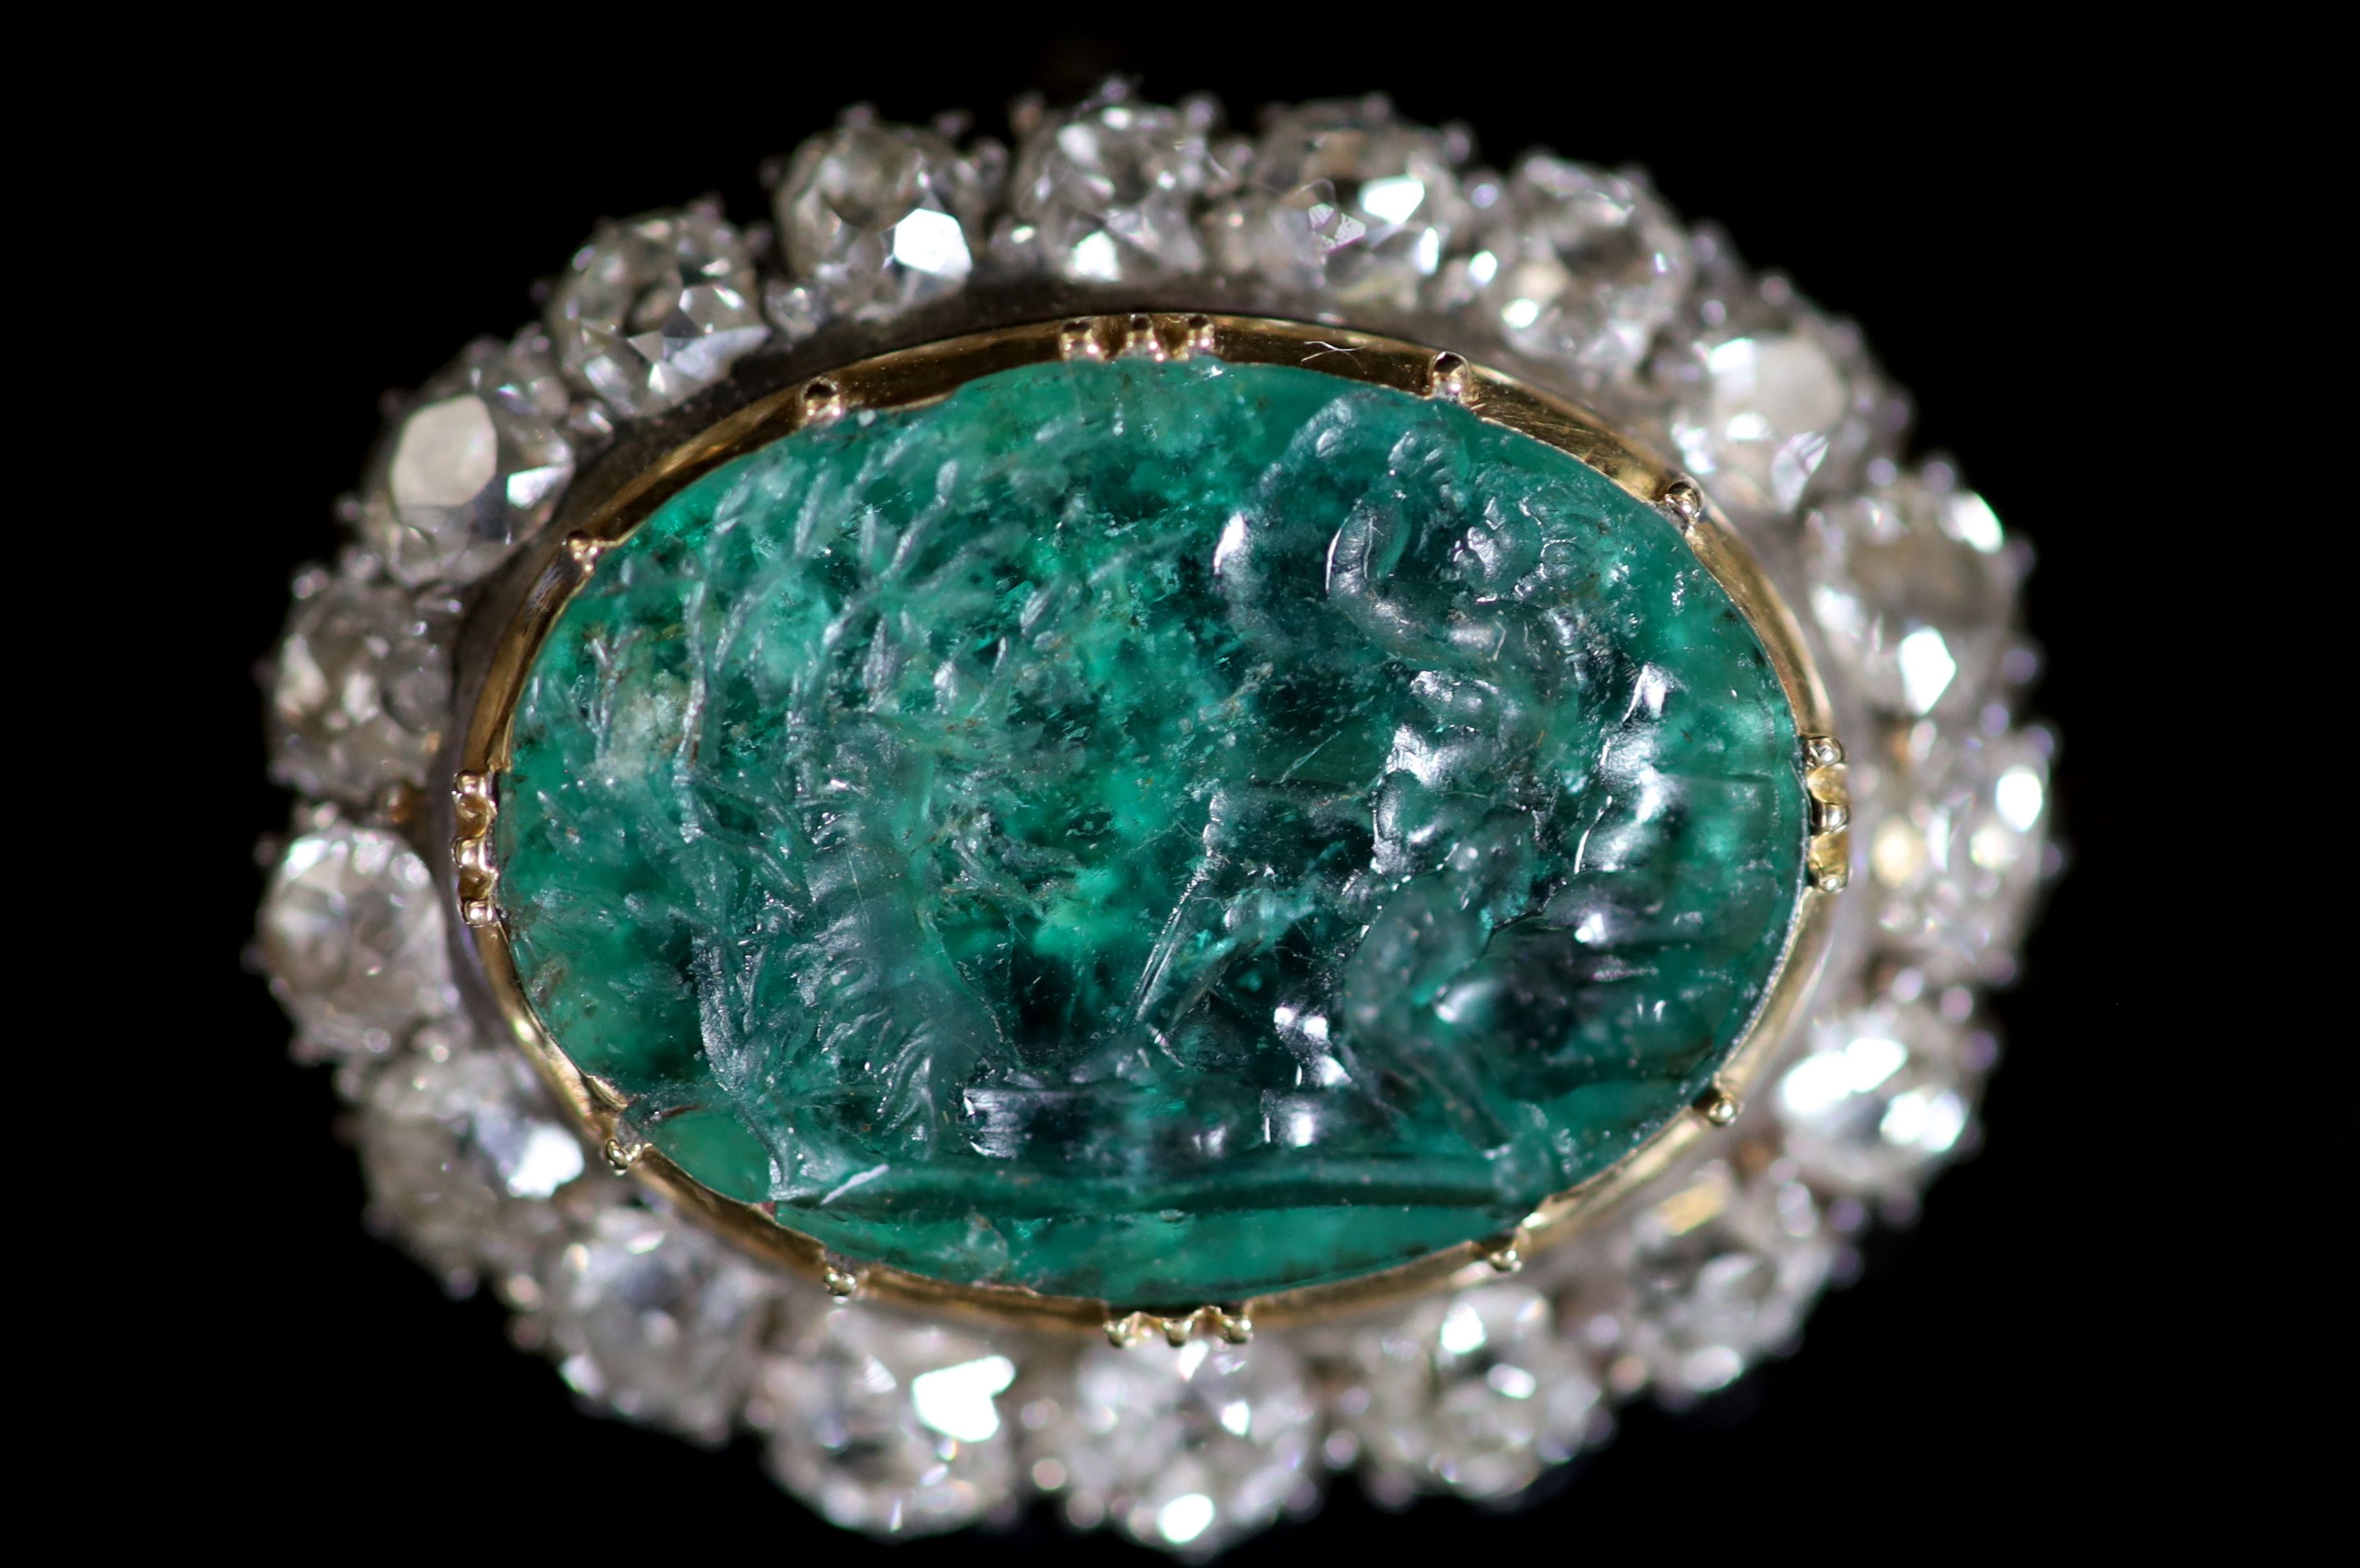 A possibly Roman oval intaglio emerald, mounted in an early Victorian gold, silver and diamond set oval pendant brooch